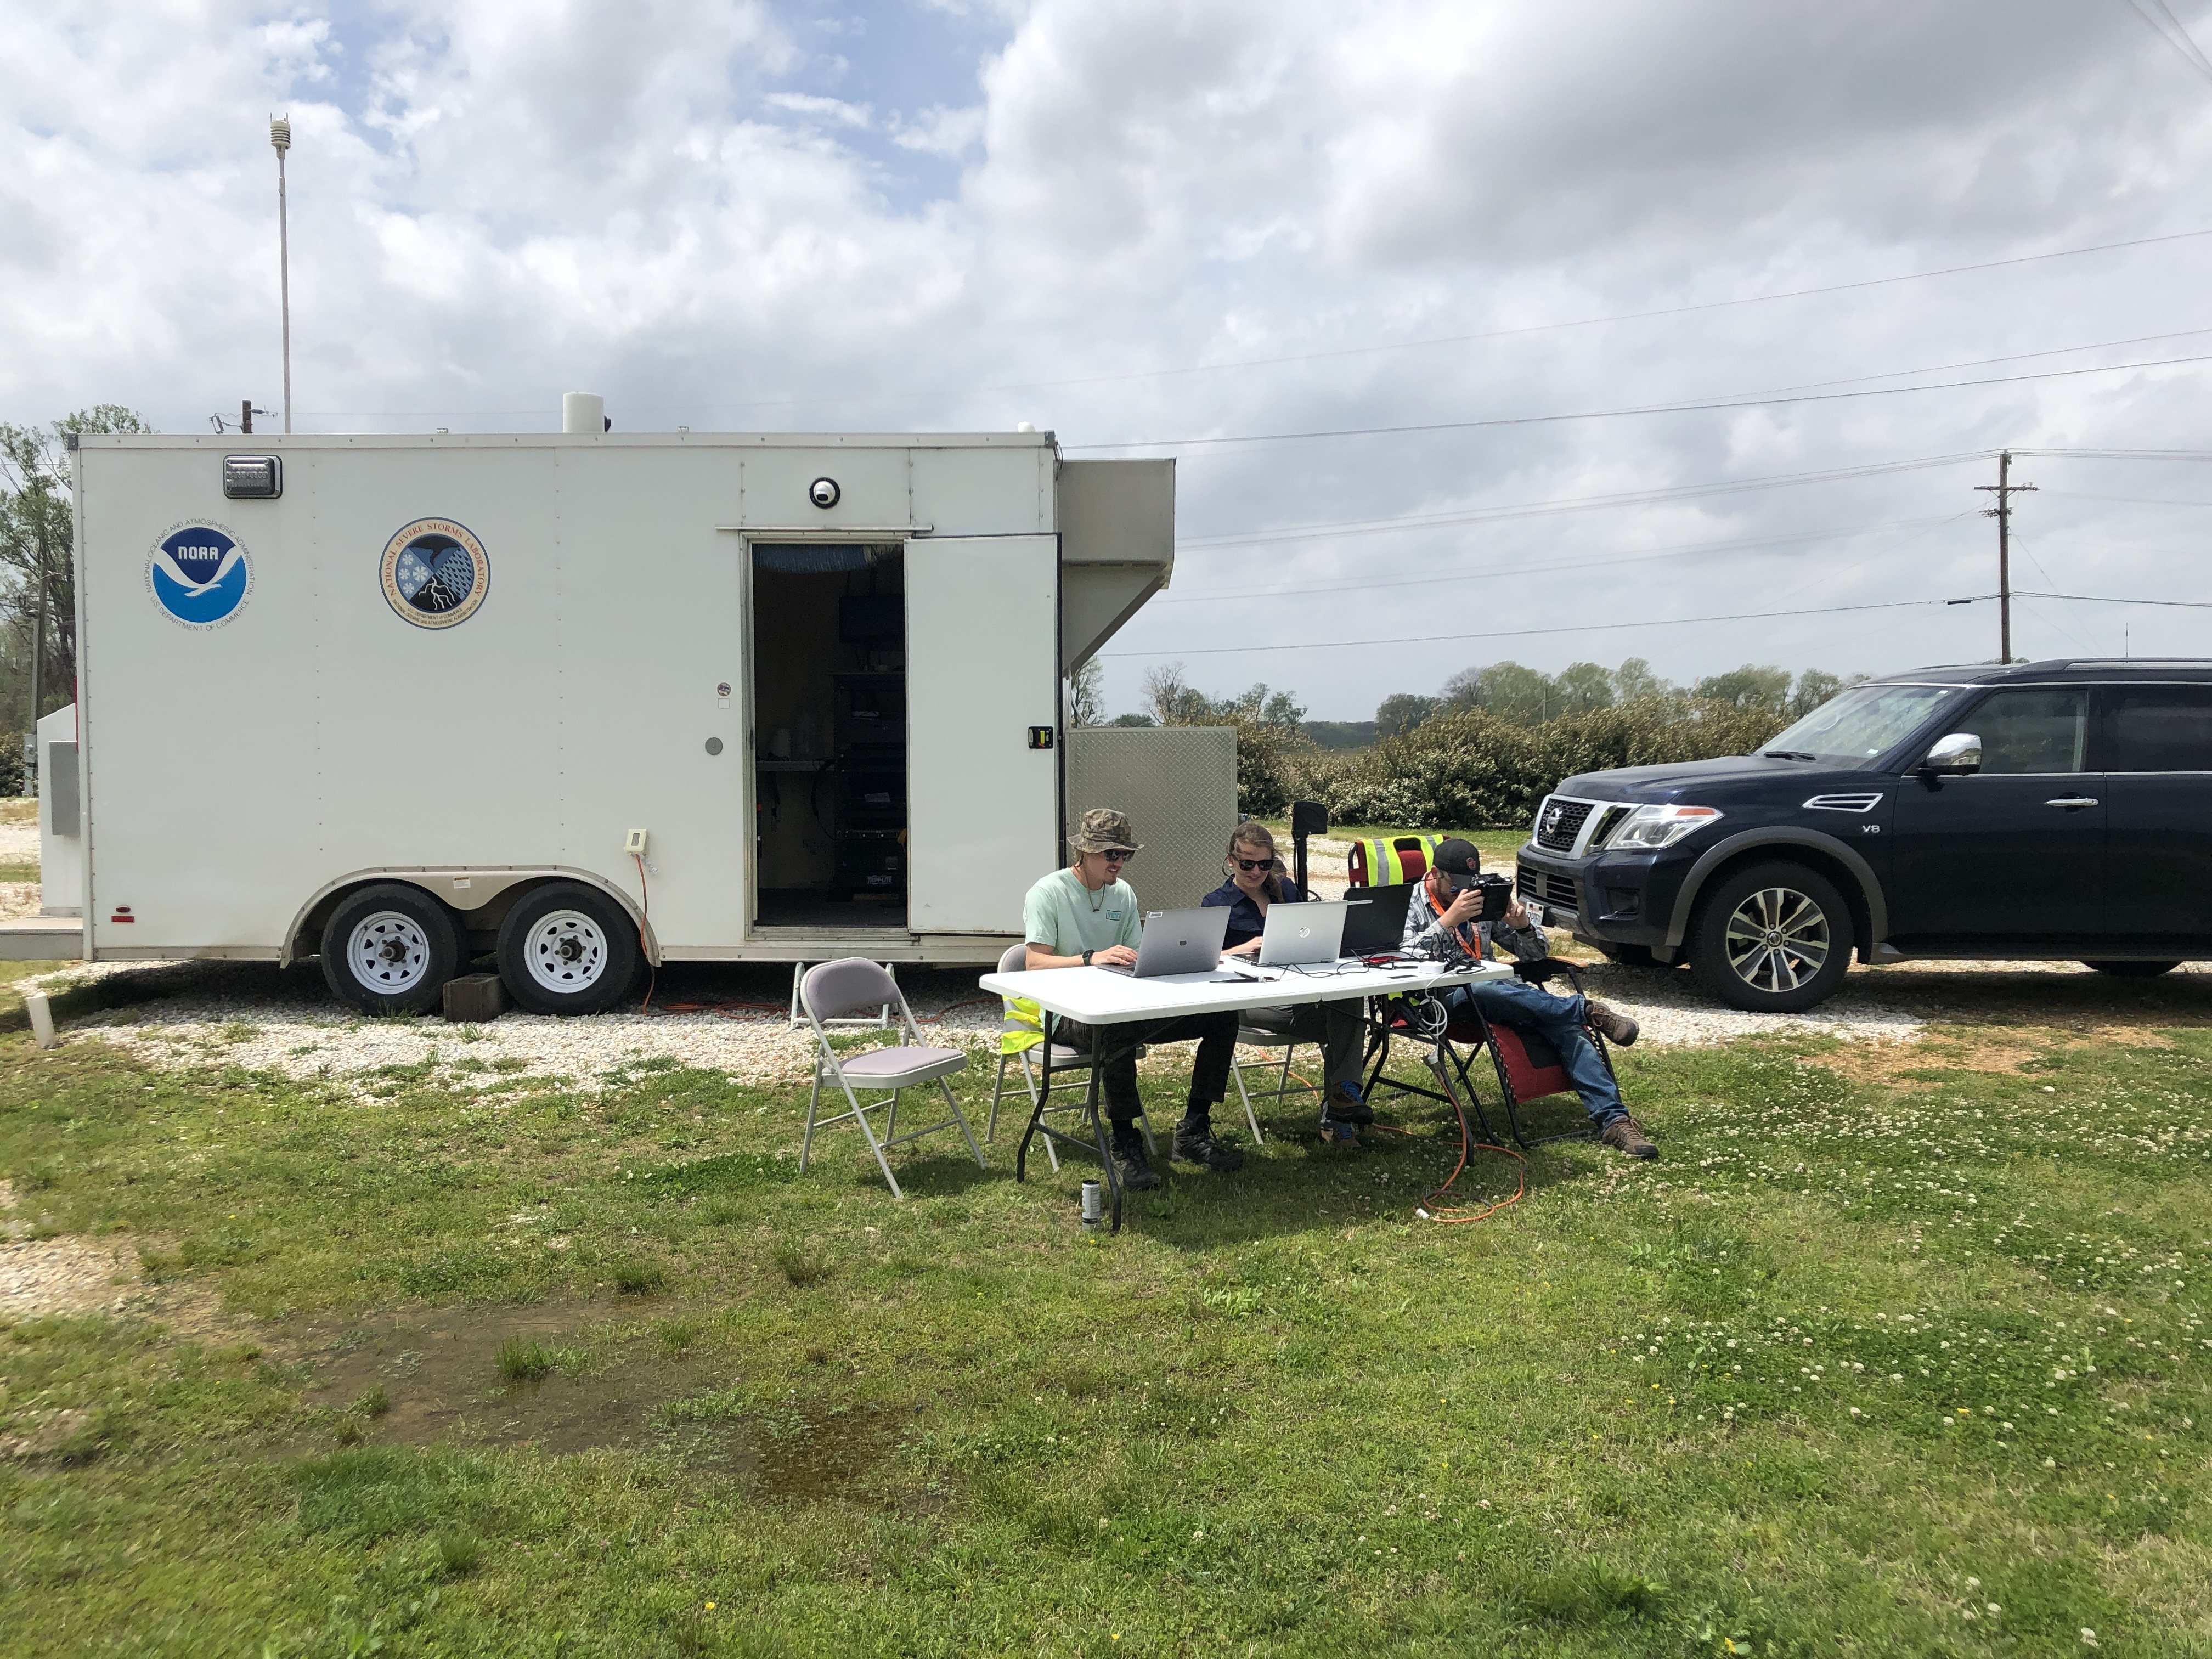 NOAA Equipment trailer with people working outside.